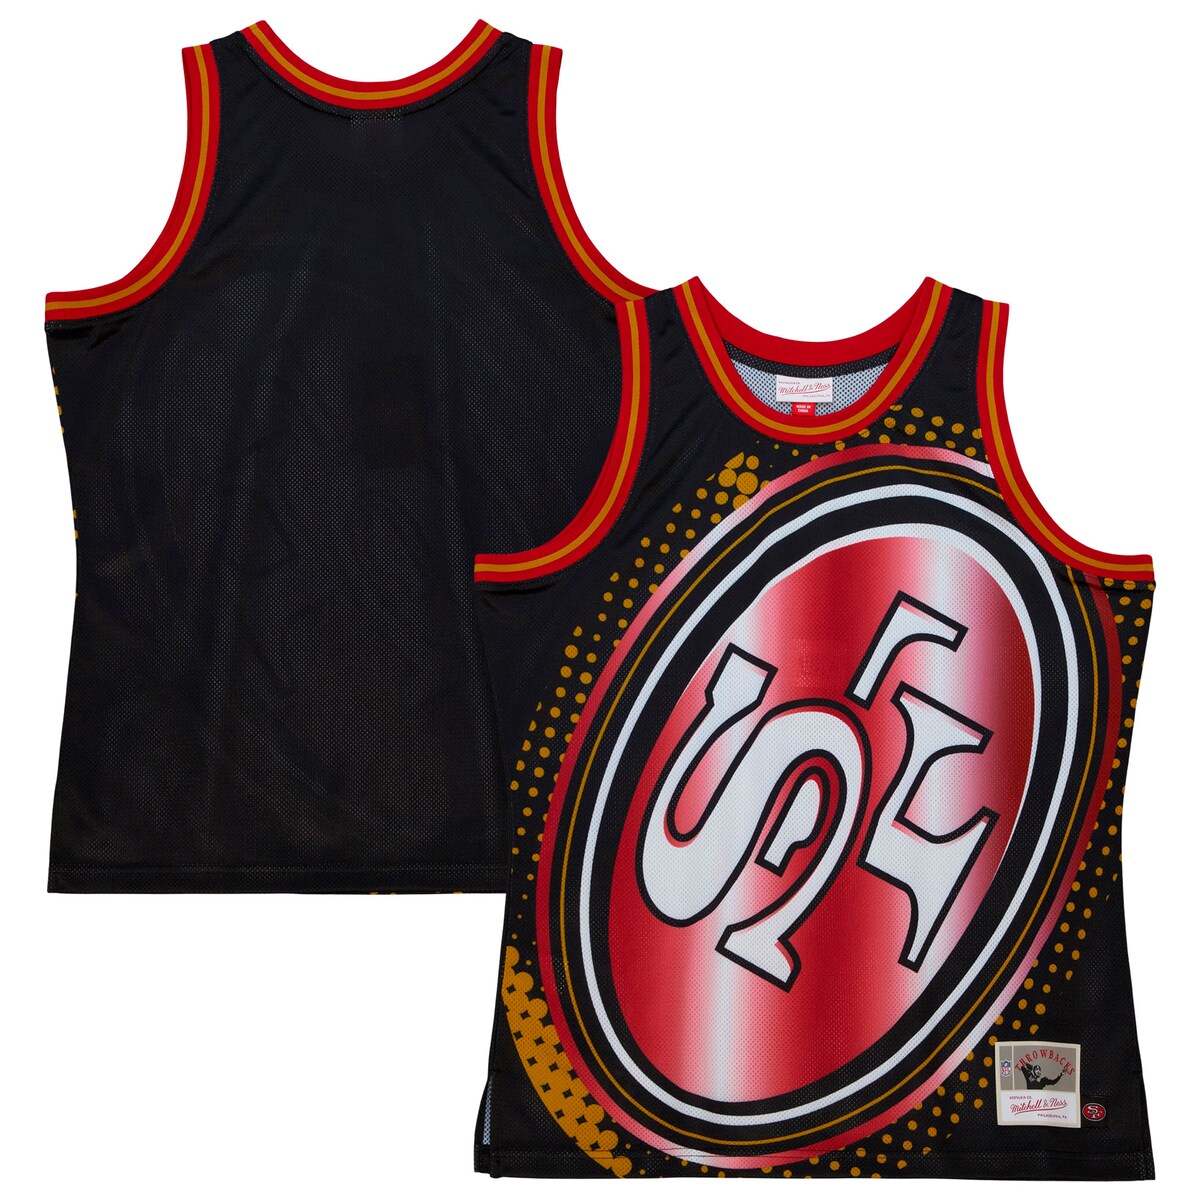 Perfect for sunny game days, this Big Face 7.0 Fashion Tank Top is ready to show your San Francisco 49ers fandom when the temps heat up. Mitchell & Ness designed this top with ultra-soft fabric and sleeveless construction for optimal levels of comfort. The San Francisco 49ers graphics add a throwback-inspired twist to your collection.Officially licensedRibbed collar and trimmingsBrand: Mitchell & NessCrew-neck collarSleevelessSublimated graphicsMachine wash, line dryImportedSide splits at hemMaterial: 100% Polyester